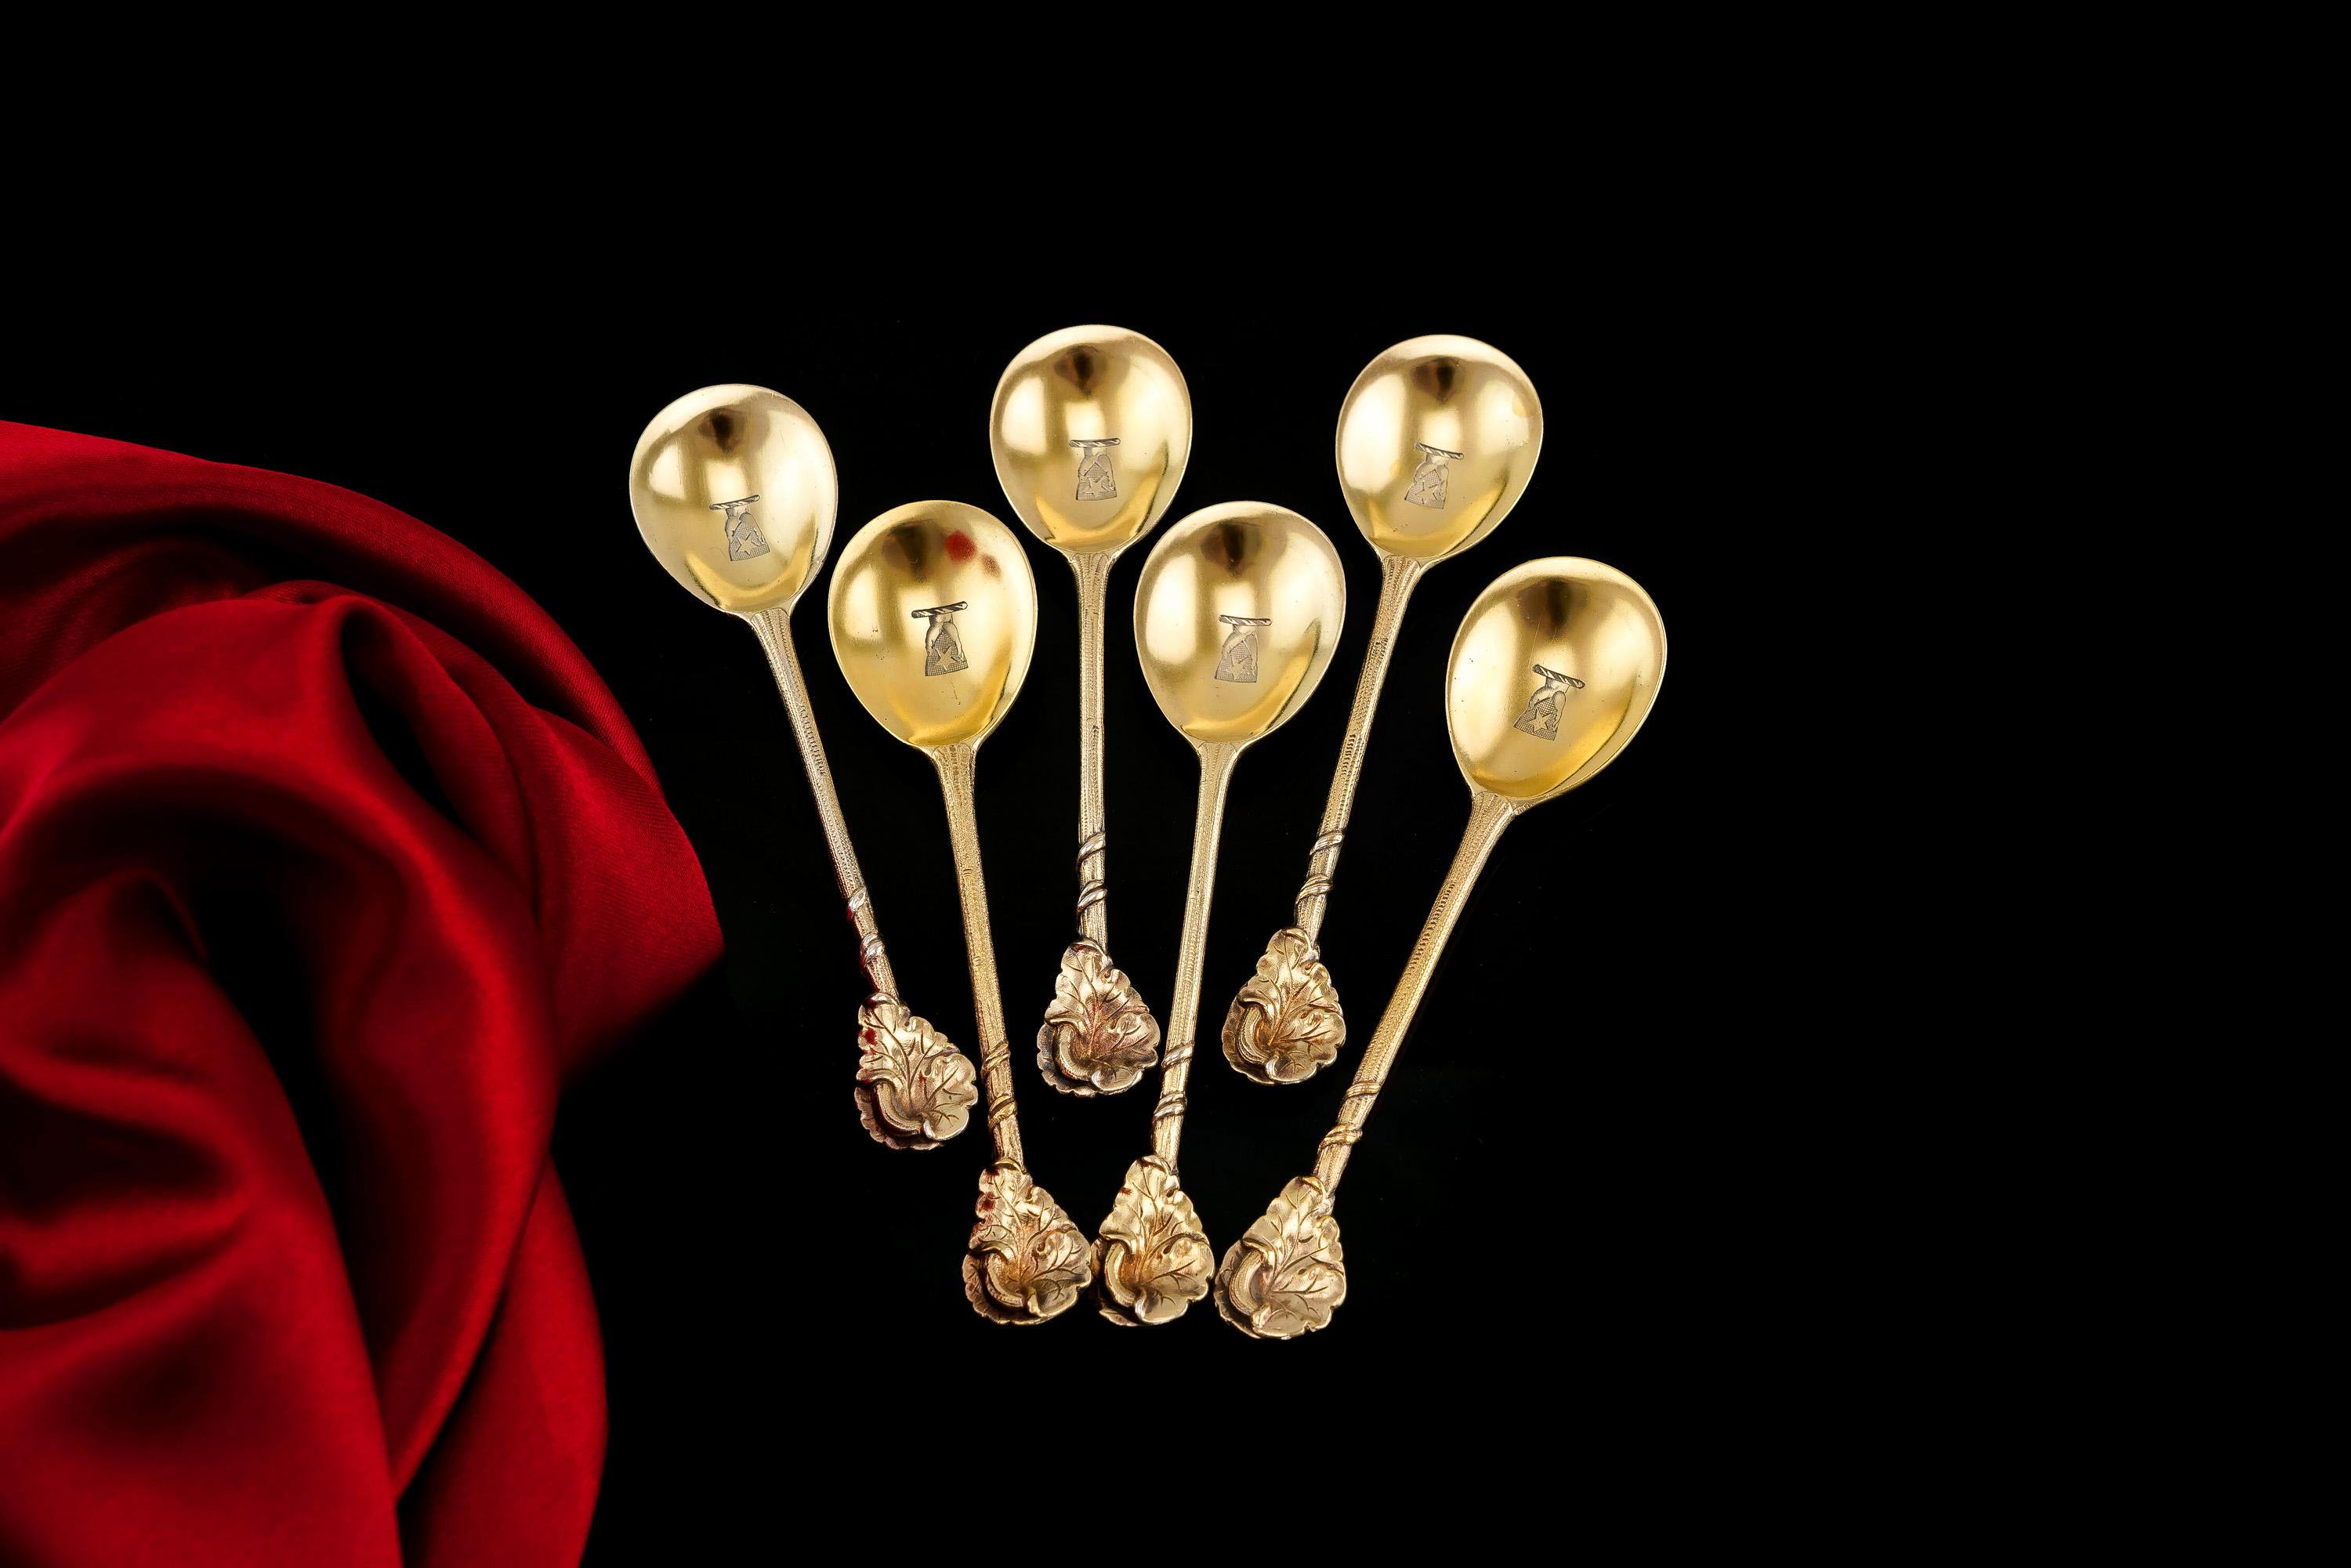 We are delighted to offer this unique and magnificent solid silver gilt set of 6 spoons made by specialist spoon maker Francis Higgins in London, 1875.
 
Made during the mid-Victorian era, the set presents a wonderful aesthetic flair of naturalistic